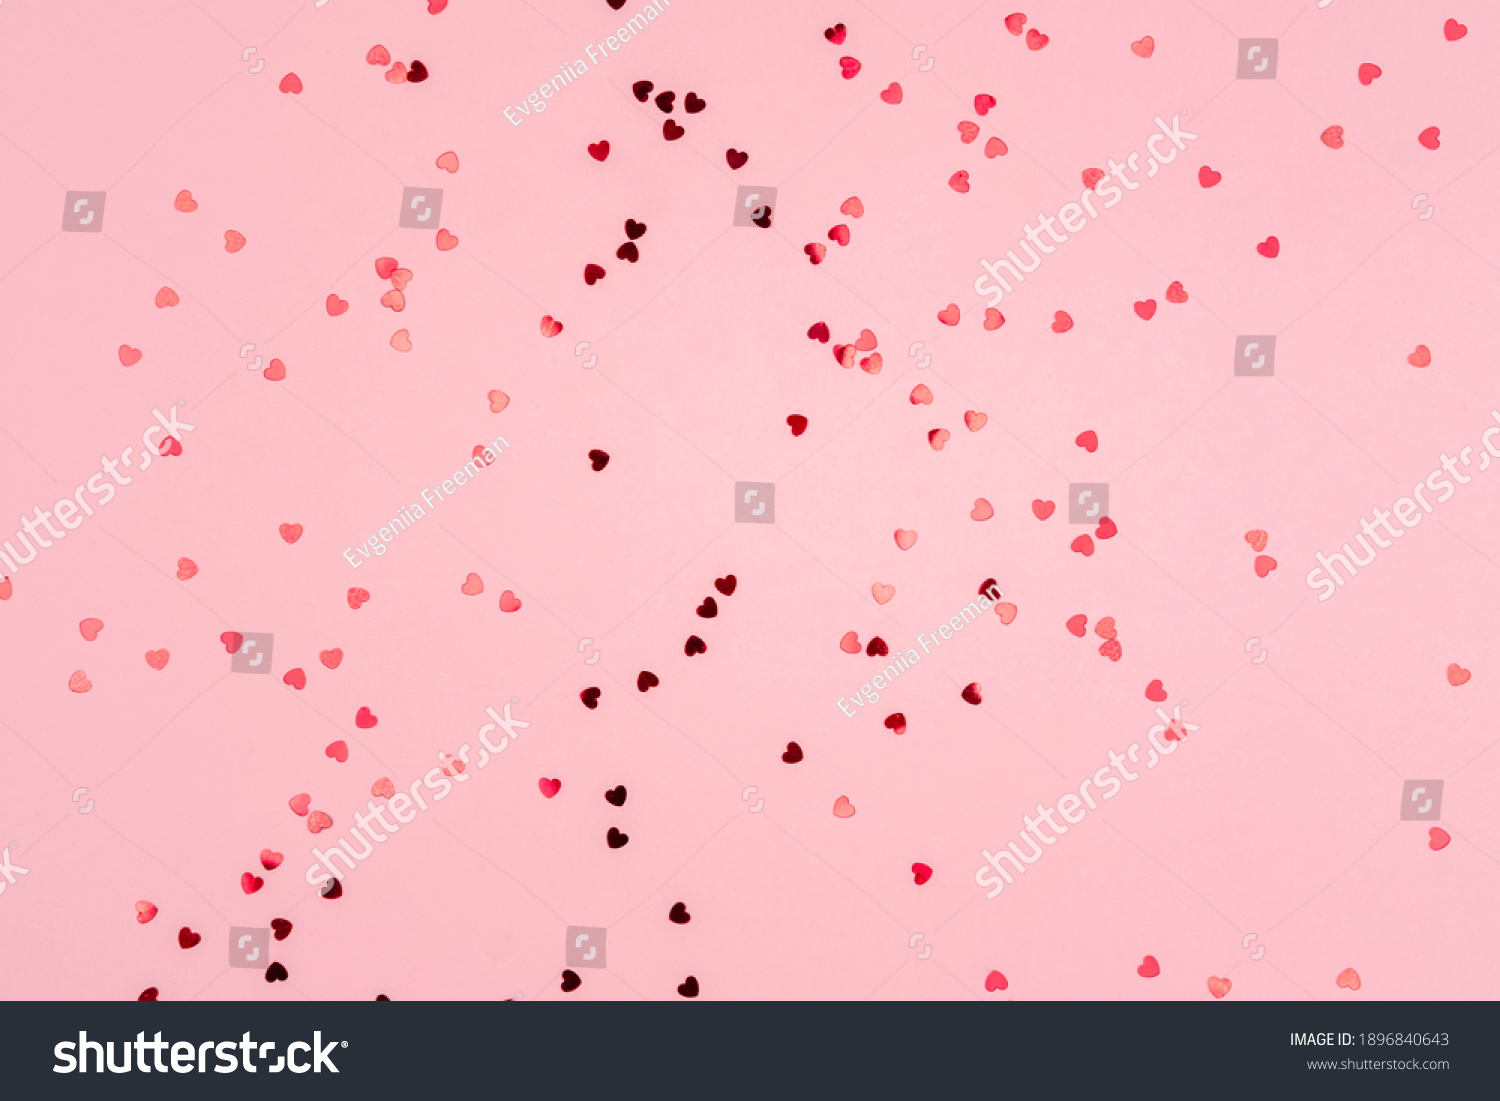 Pink background with glitter hearts for valentine's day. Beautiful wrapping paper or background for a postcard. Place for text, banner for website #1896840643